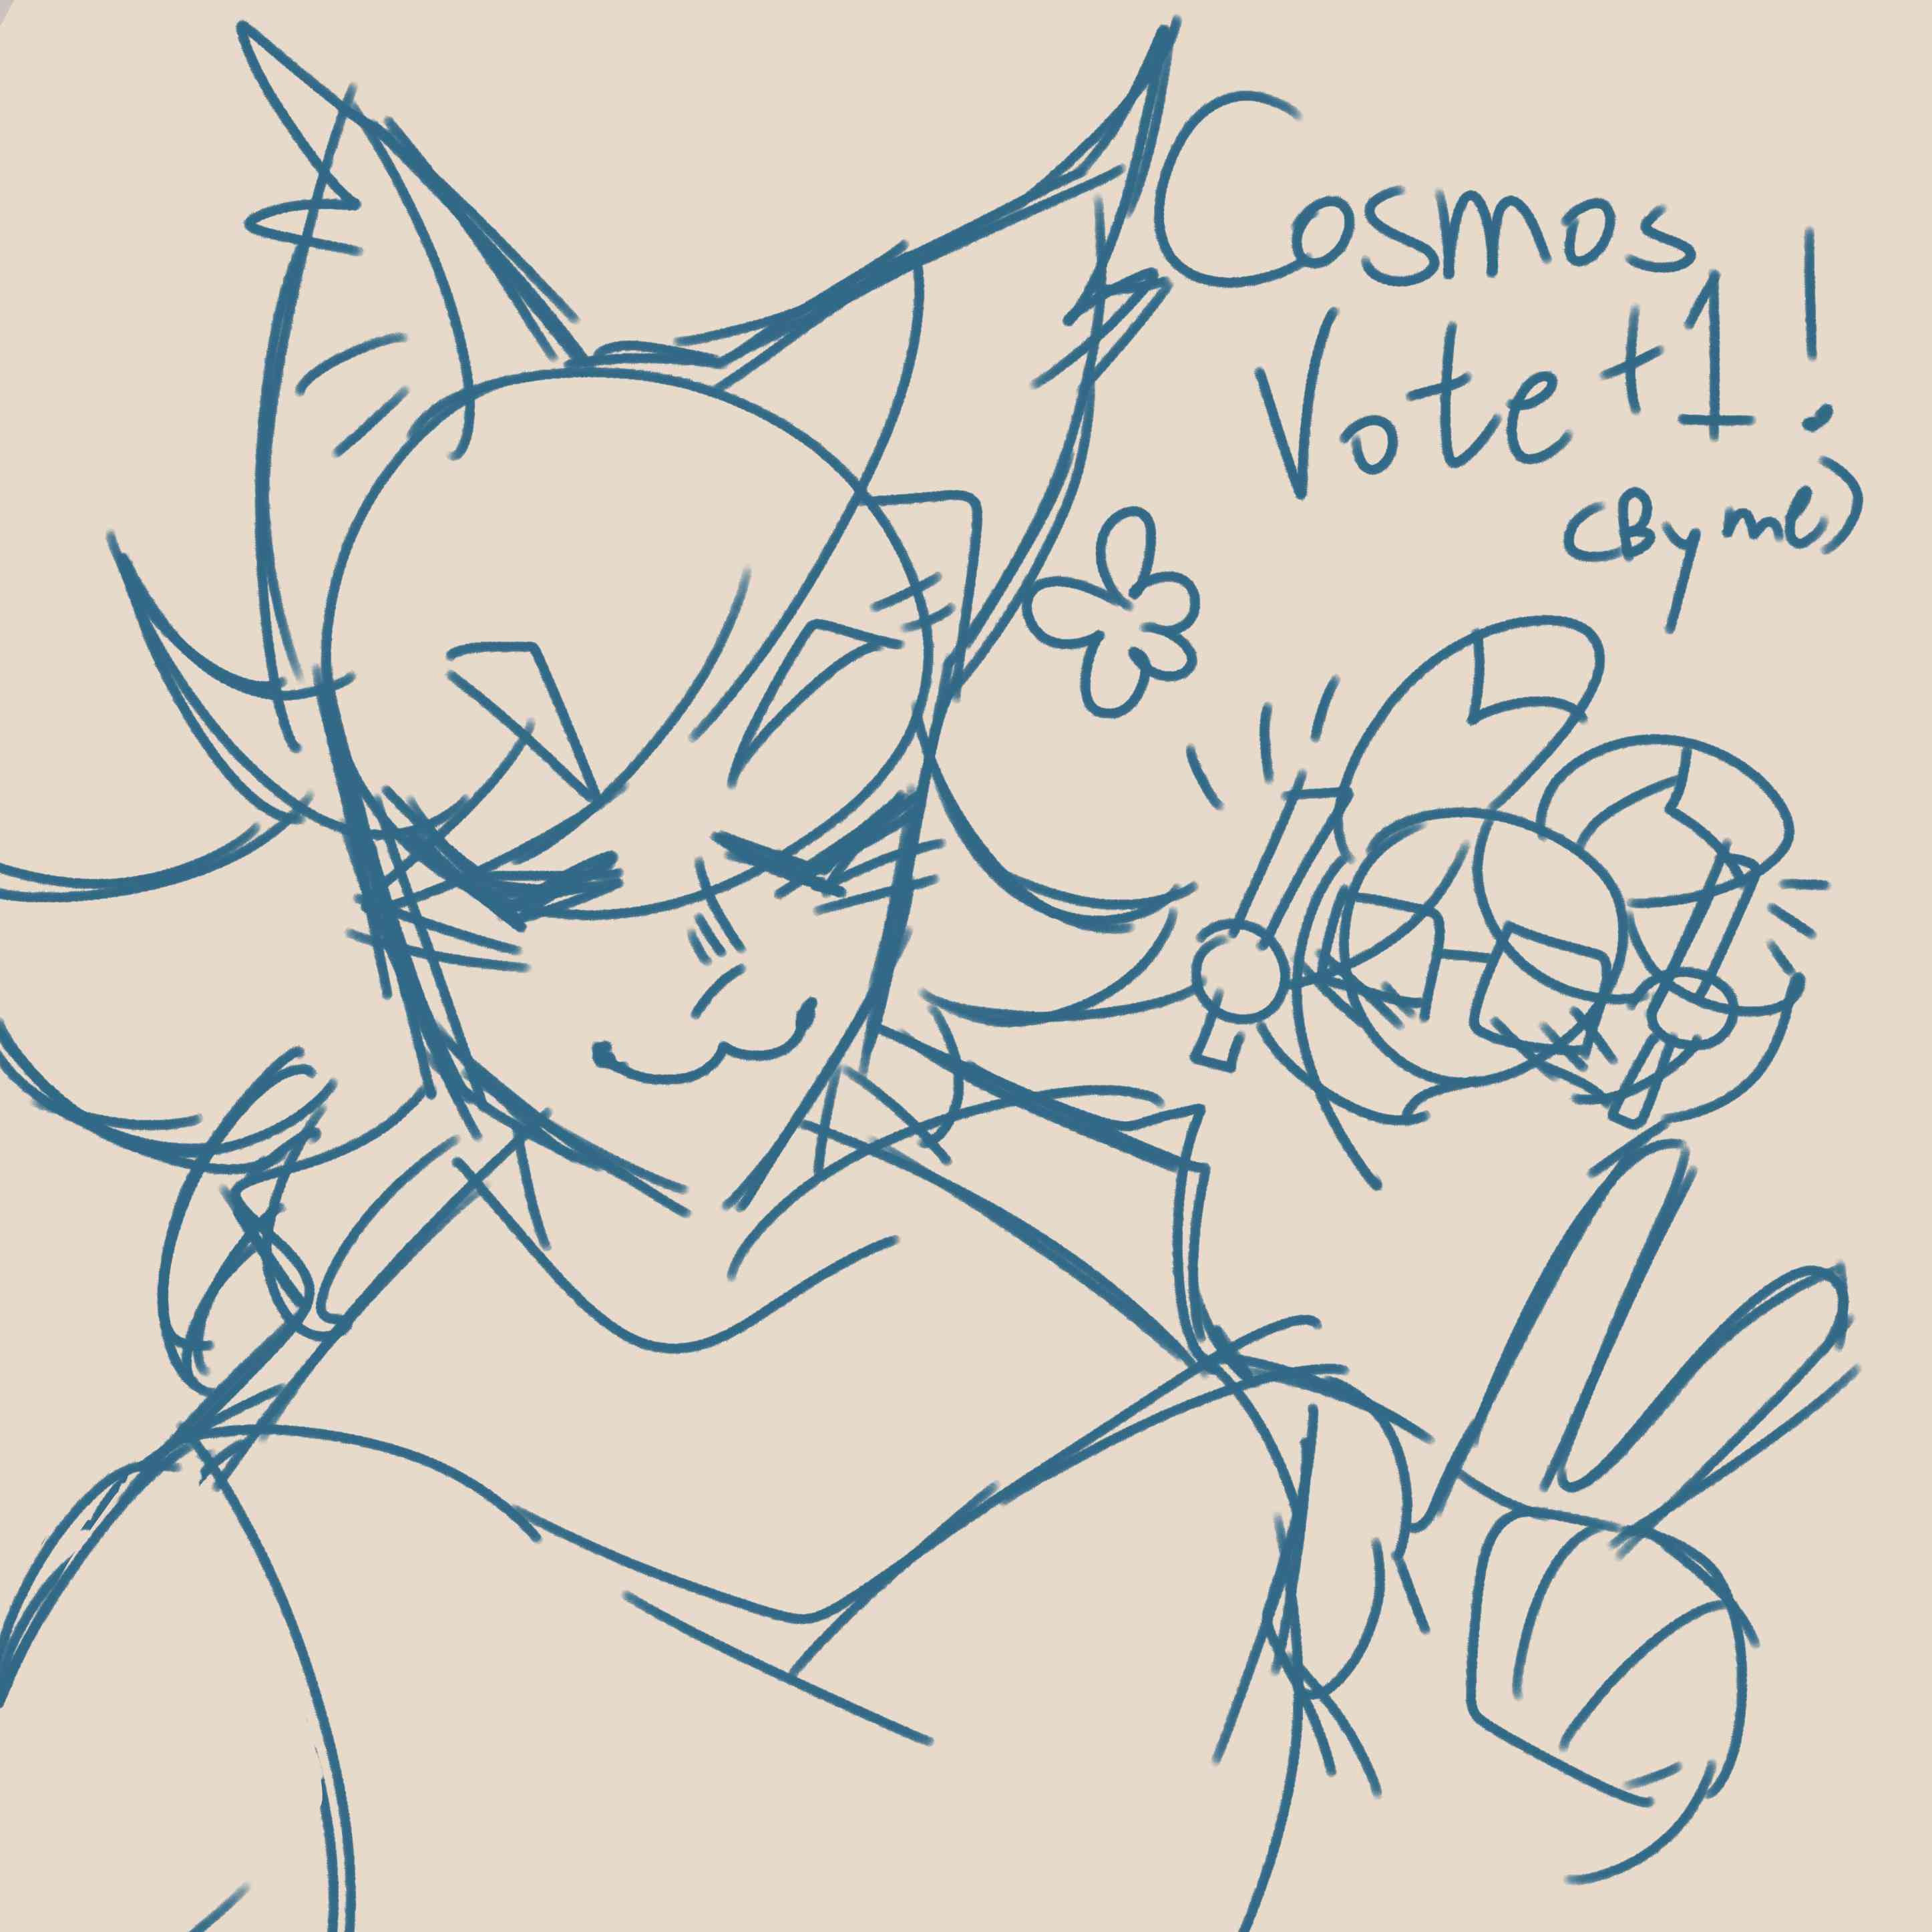 Drawing of Cosmos getting a vote in the popularity poll